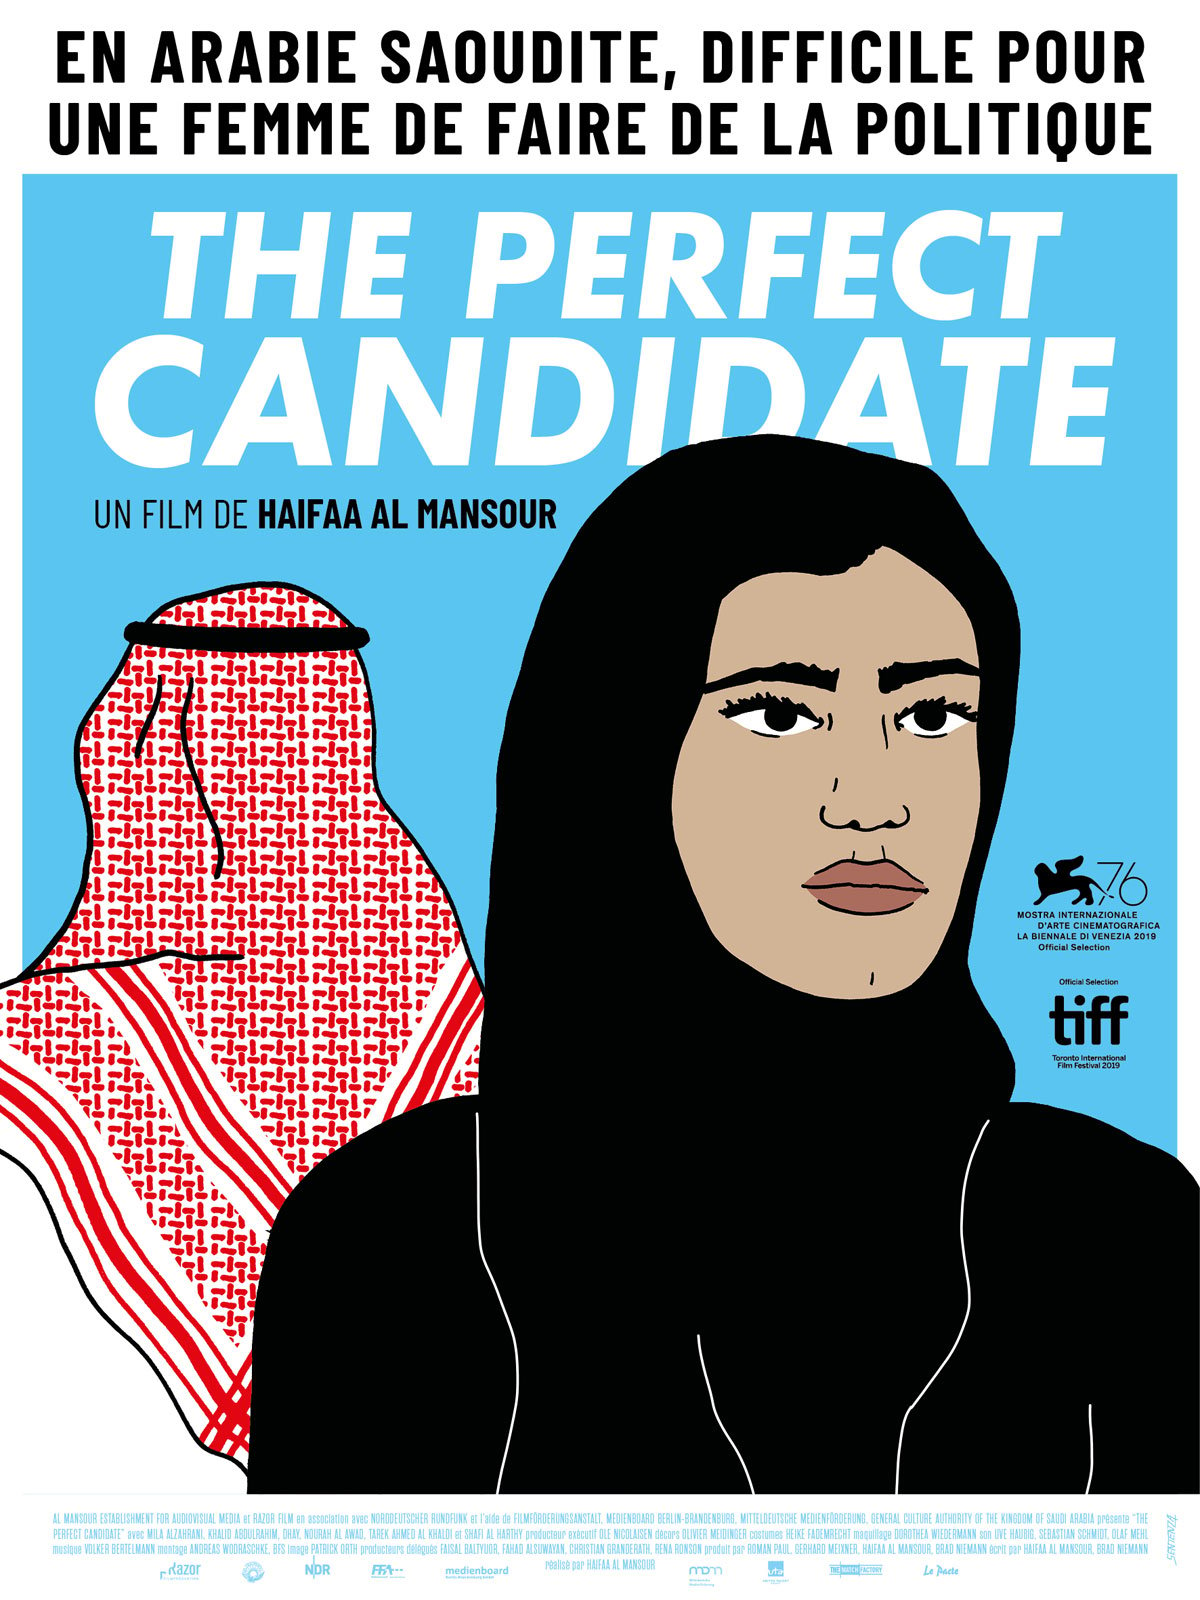 THE PERFECT CANDIDATE